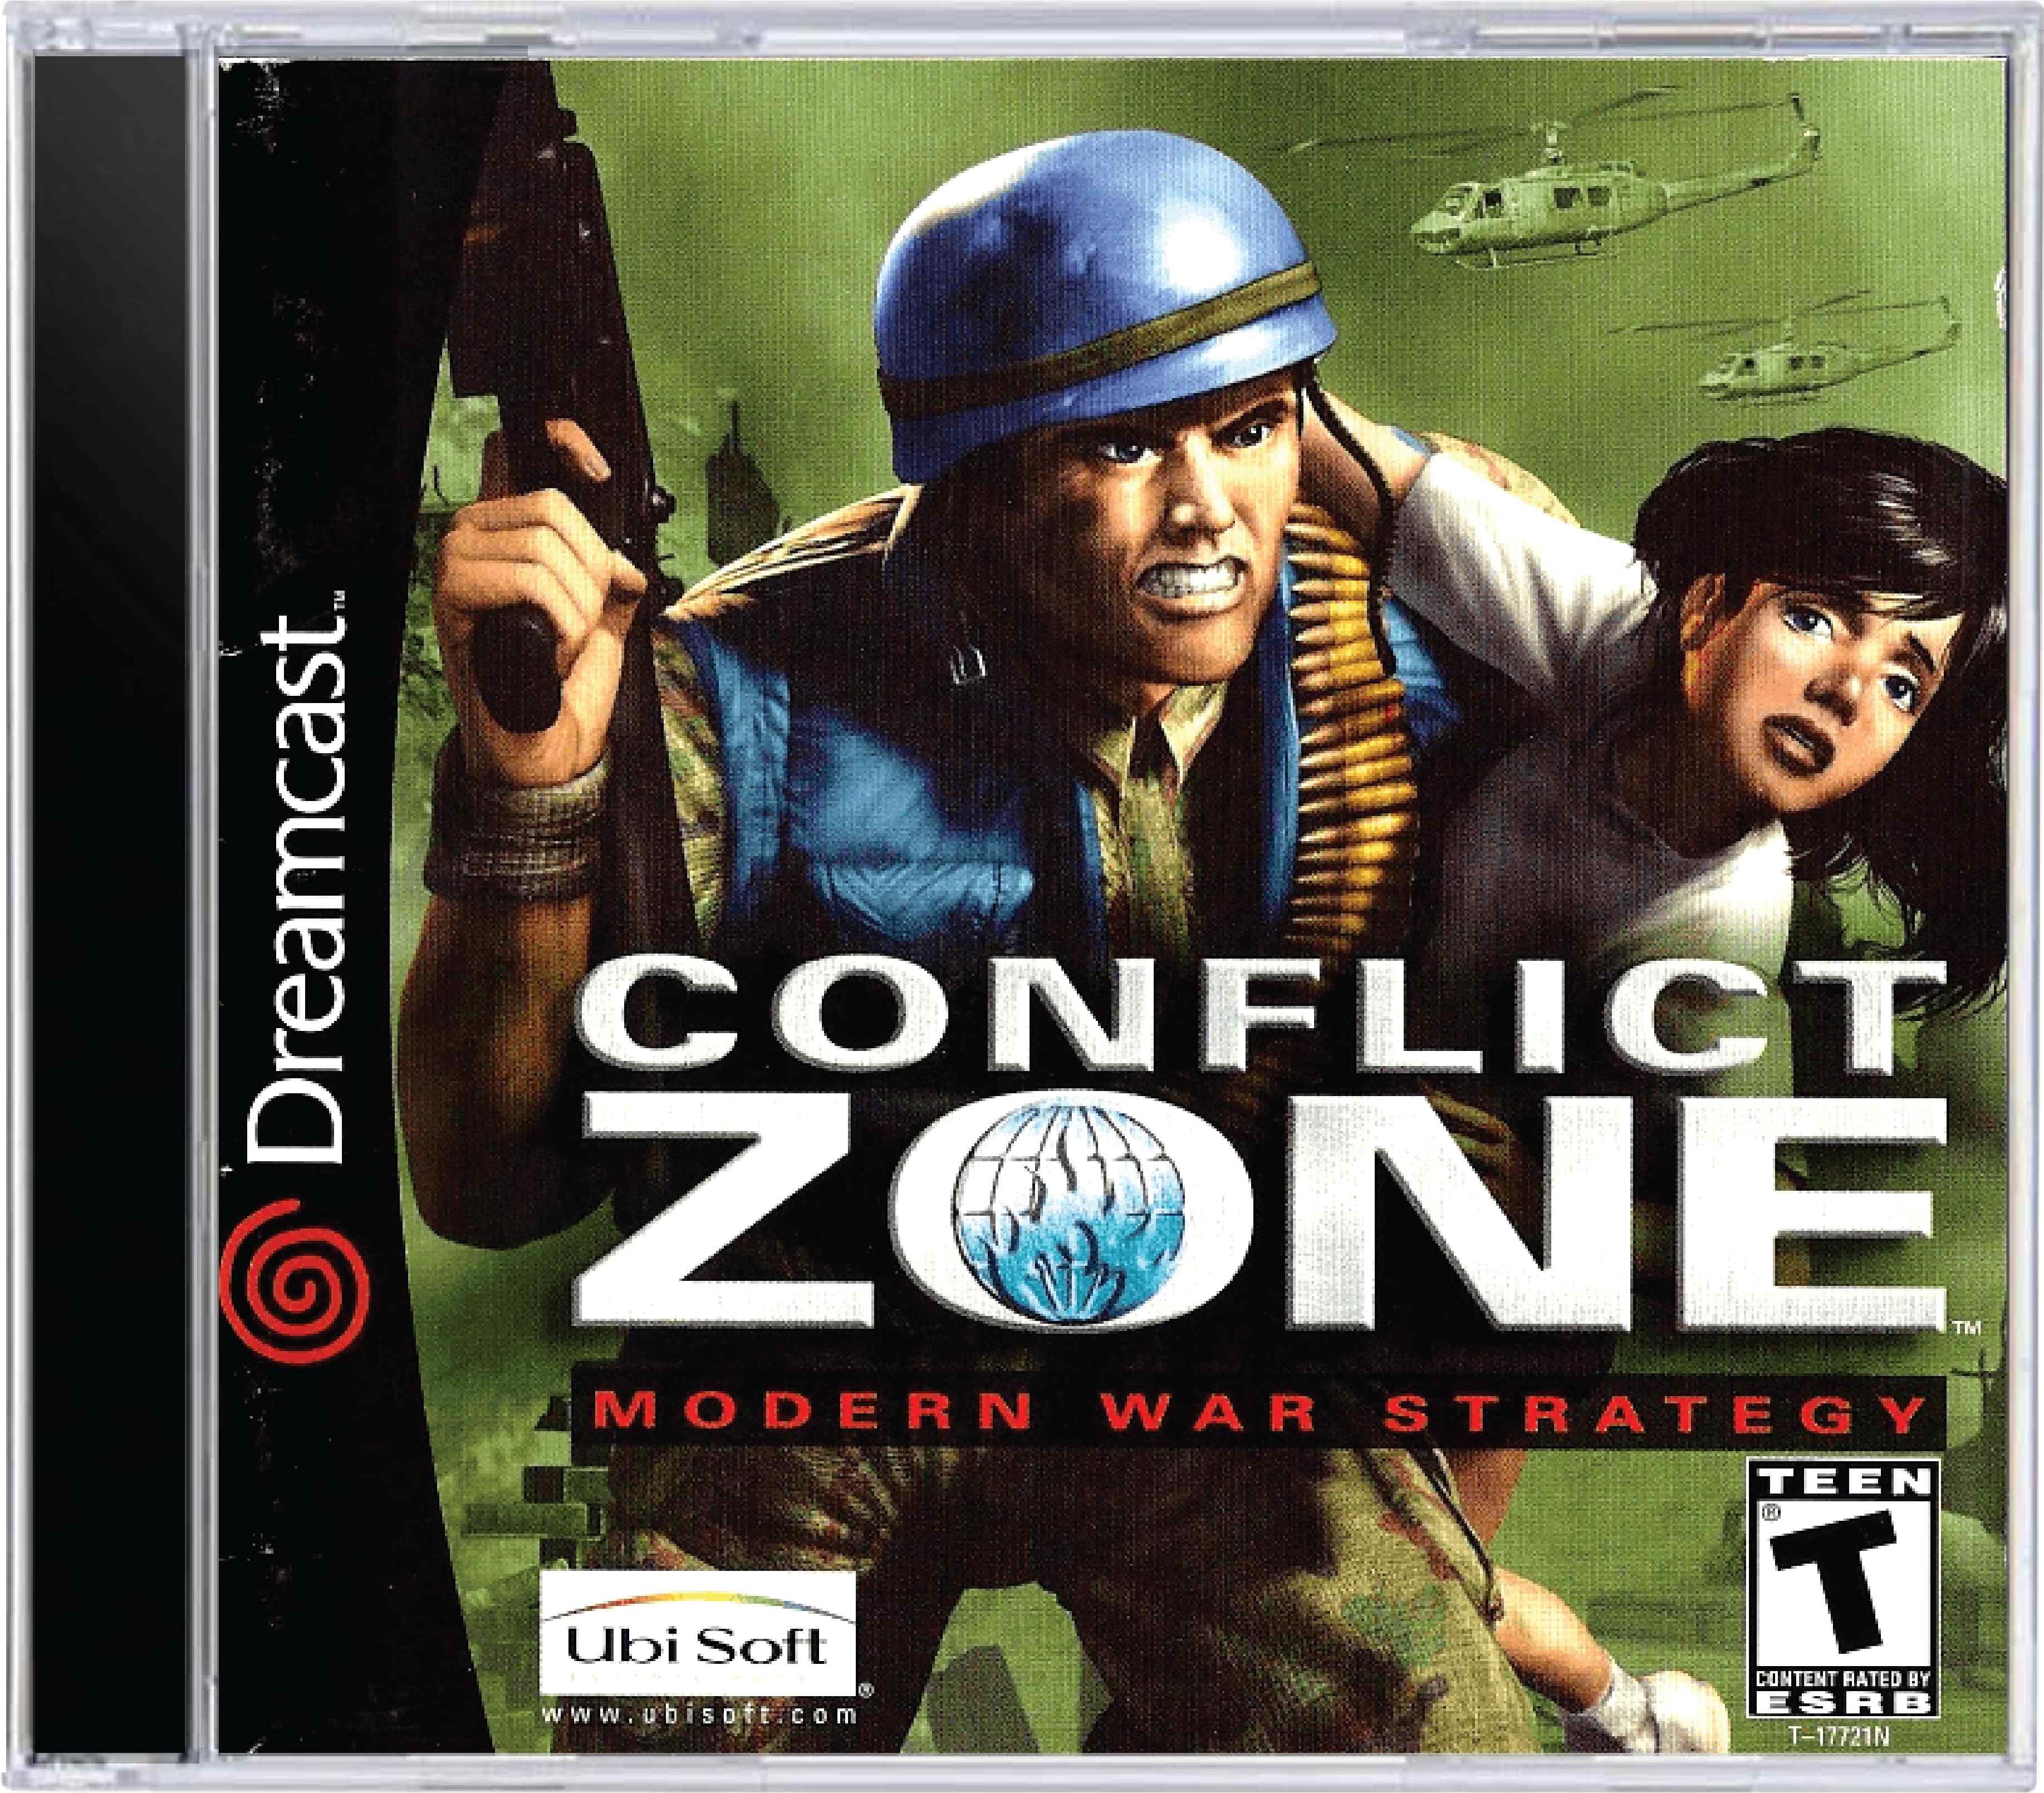 Conflict Zone Modern War Strategy Cover Art